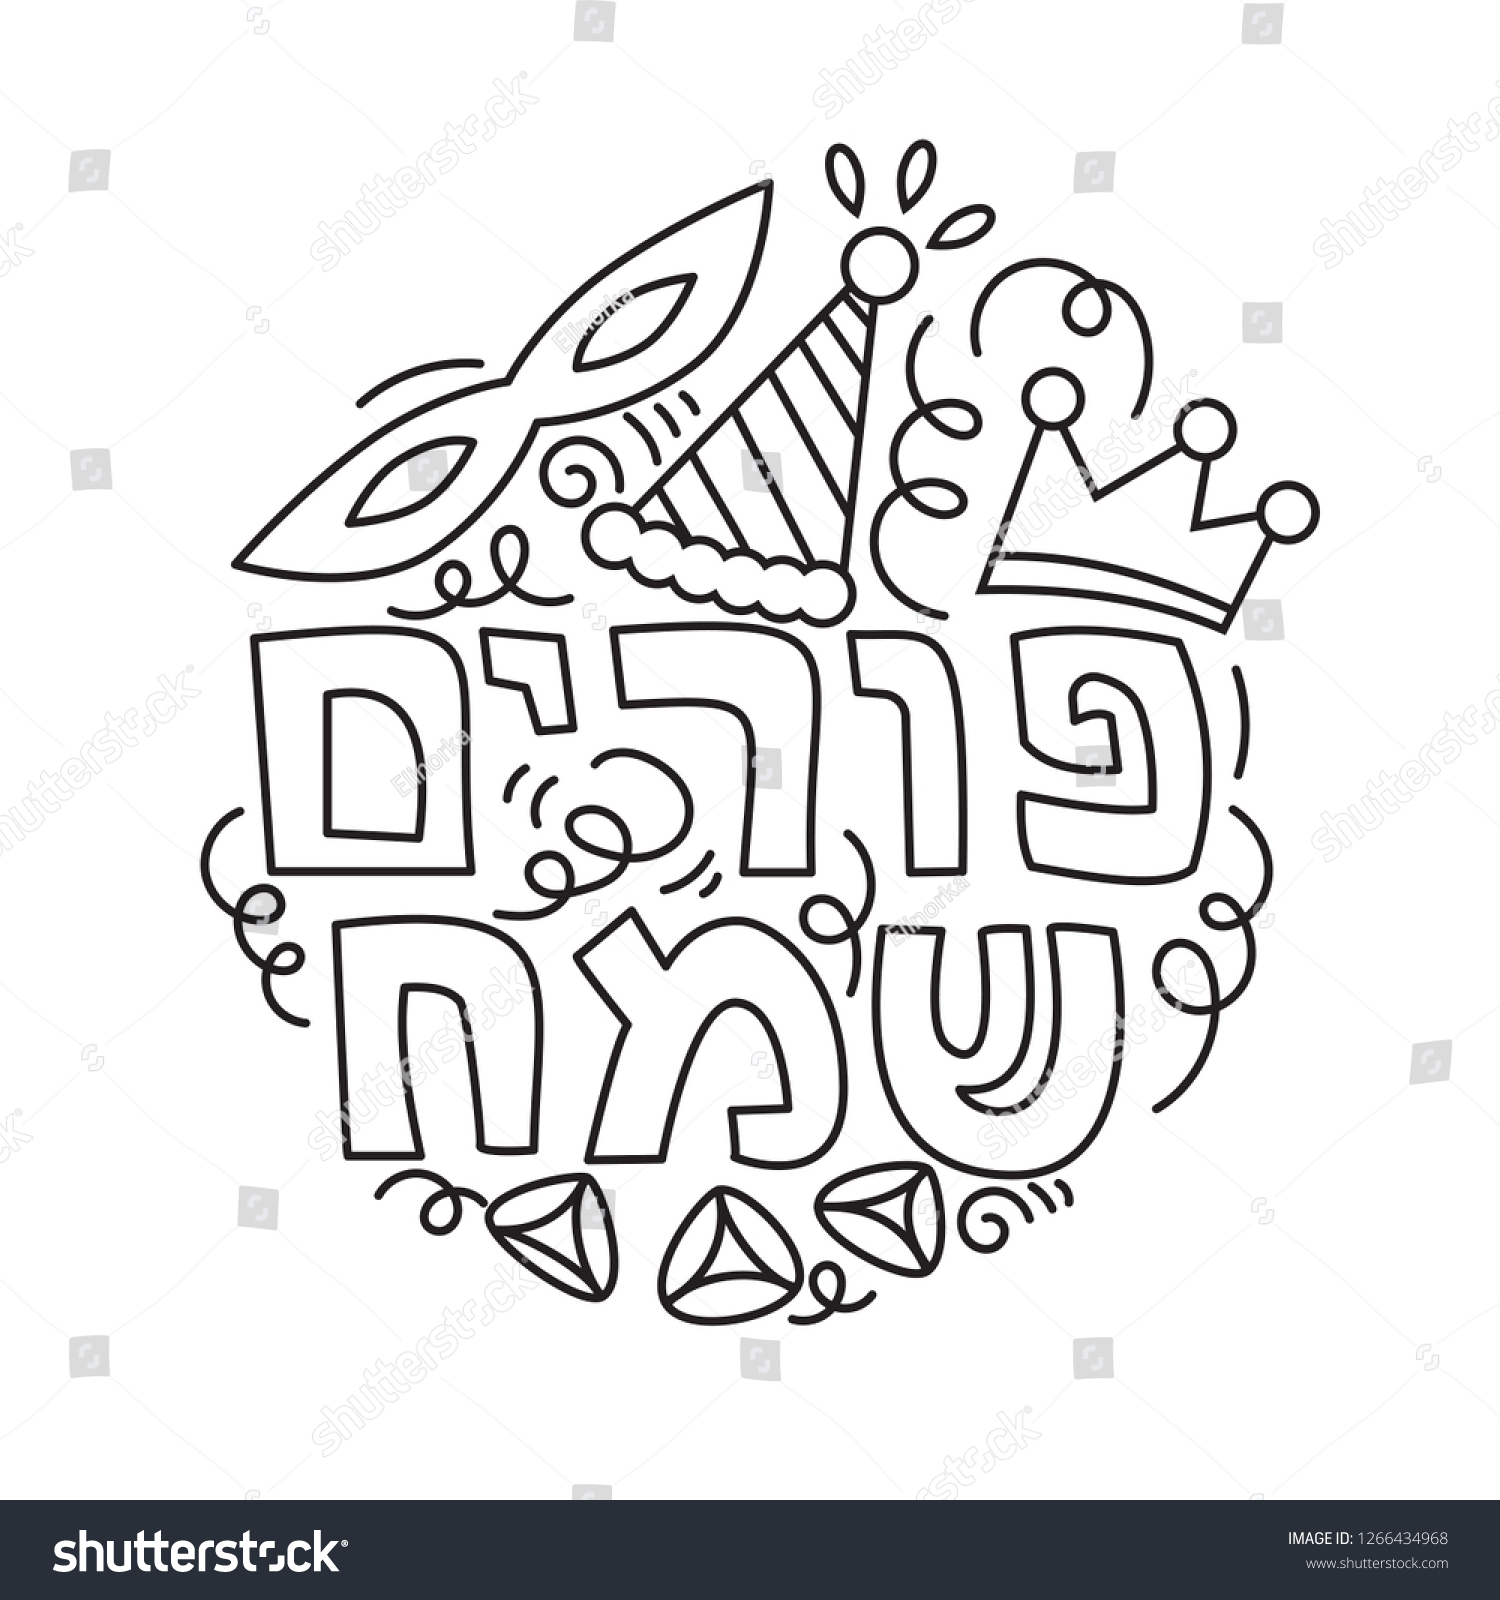 Purim Greeting Card Coloring Page Linear Royalty Free Stock Image